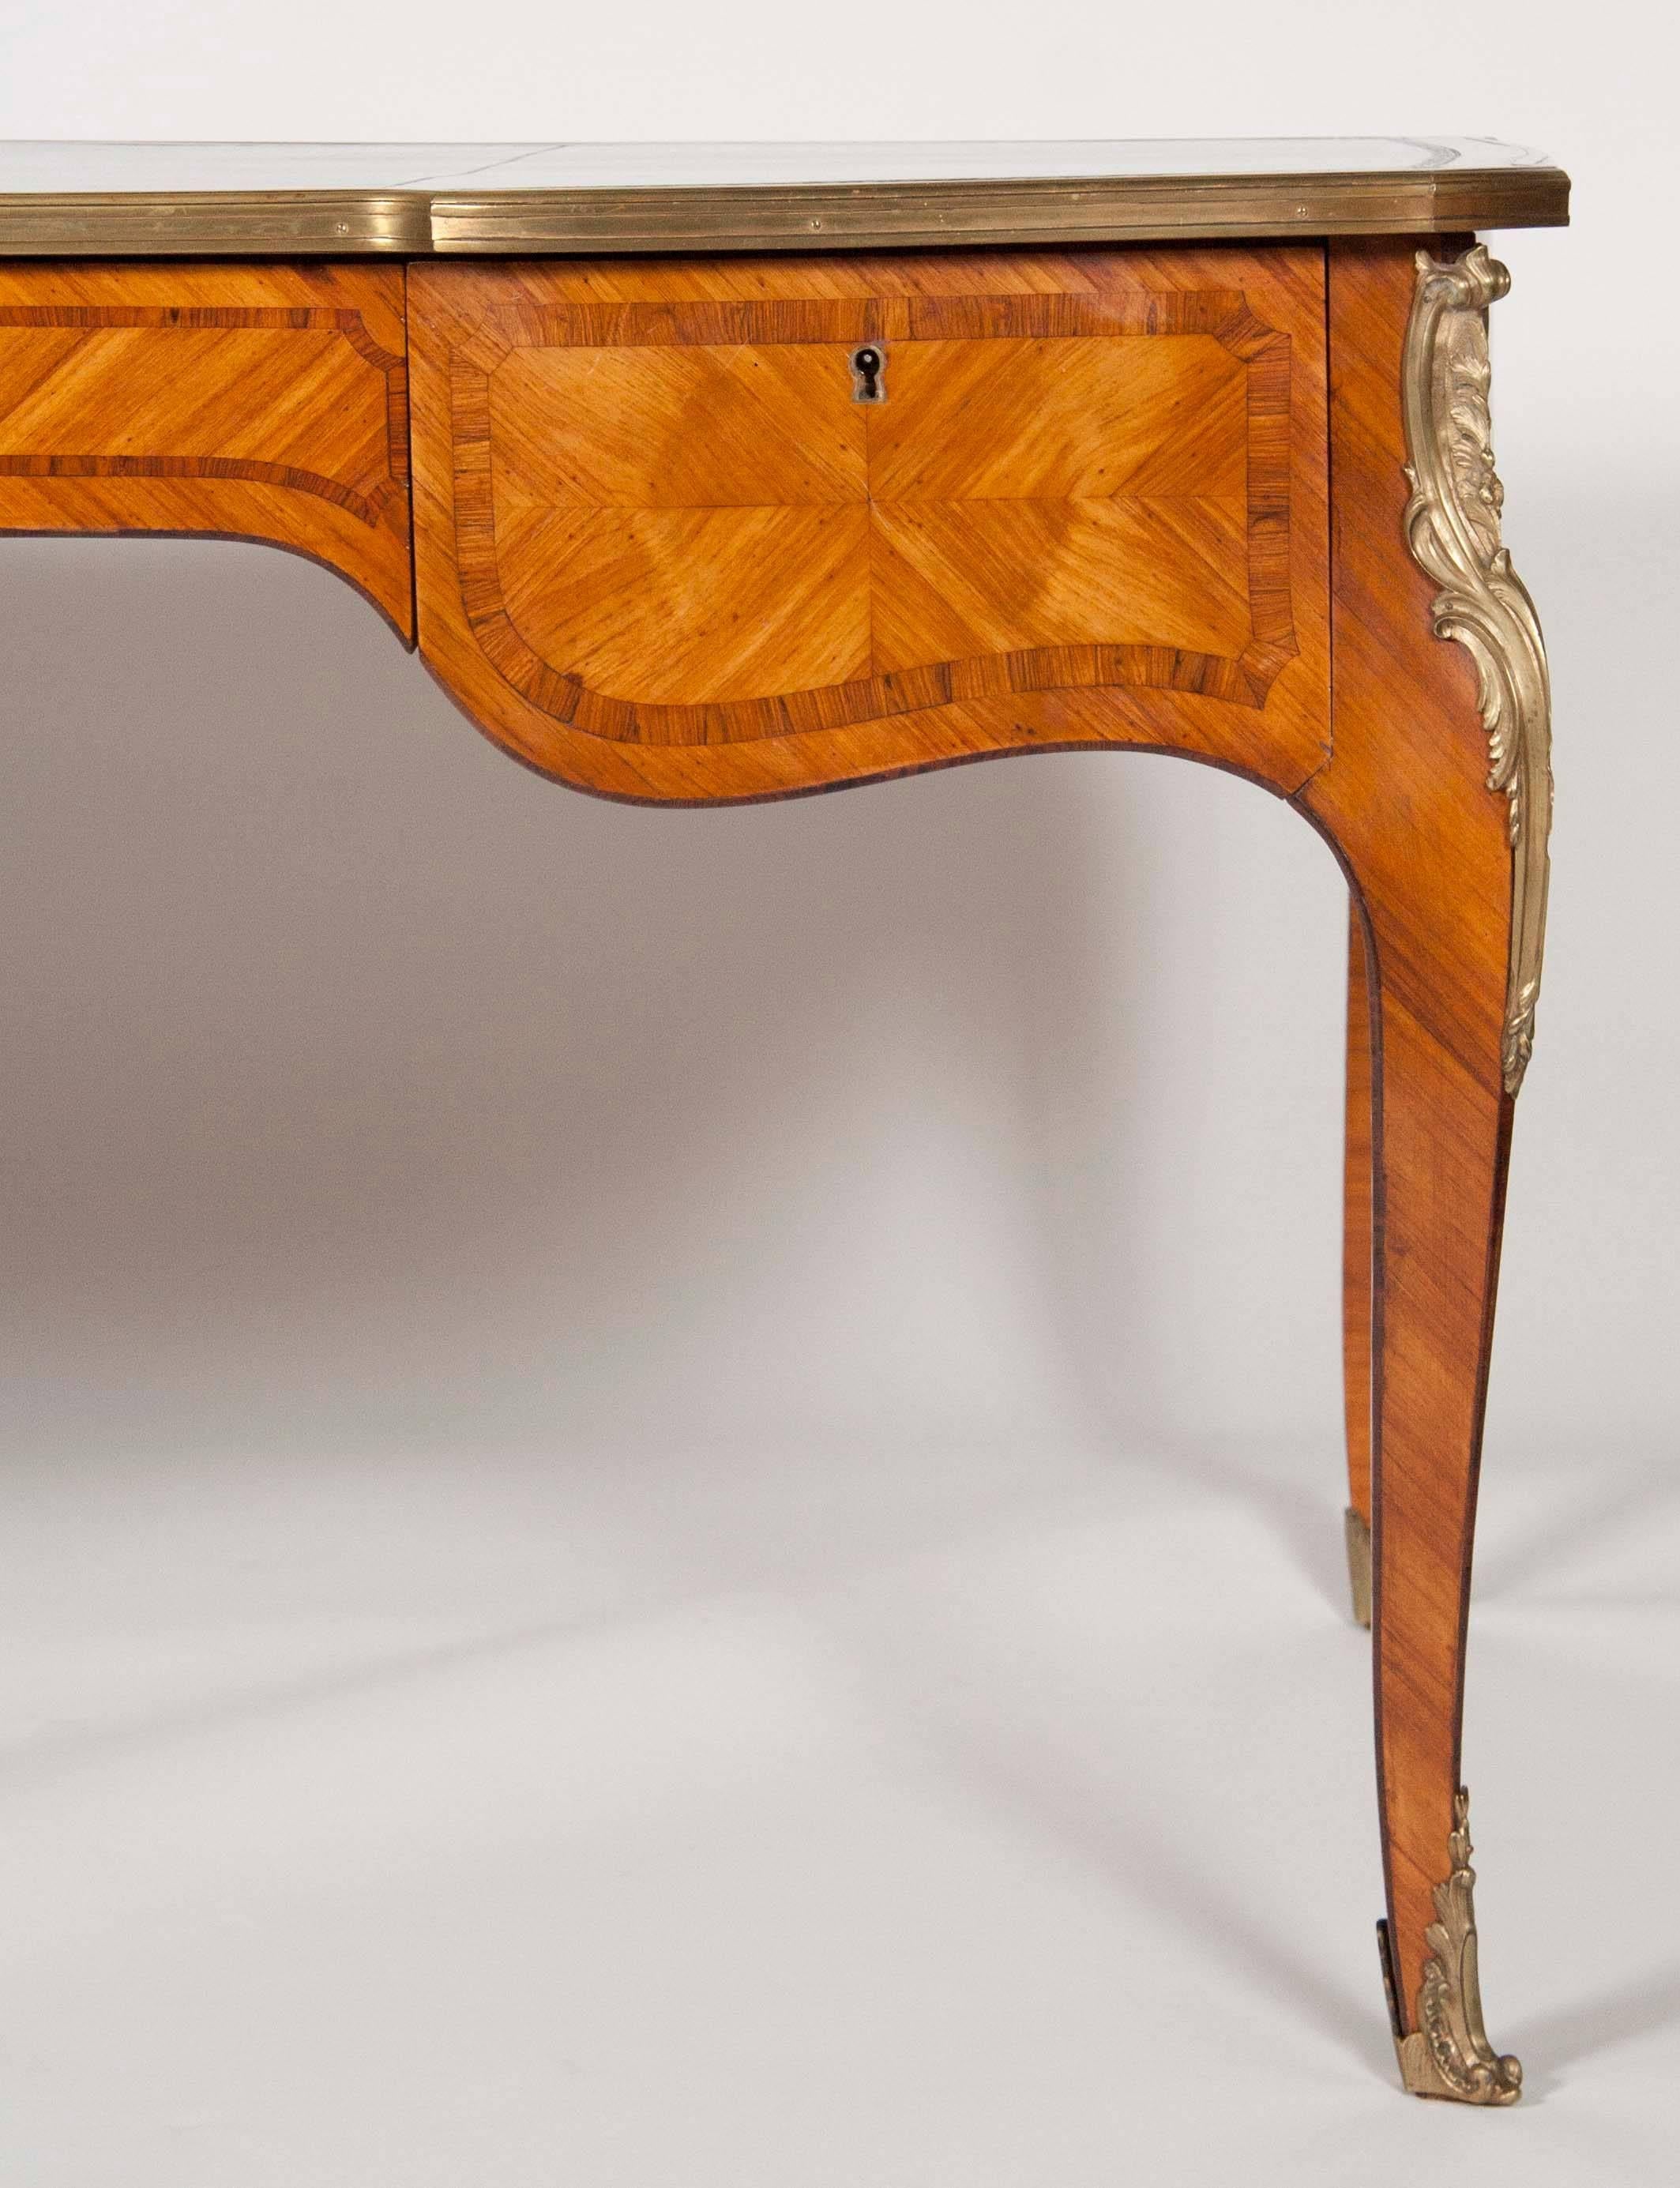 Kingwood Bureau Plat in the Louis XV Style with Tooled Leather Top 3